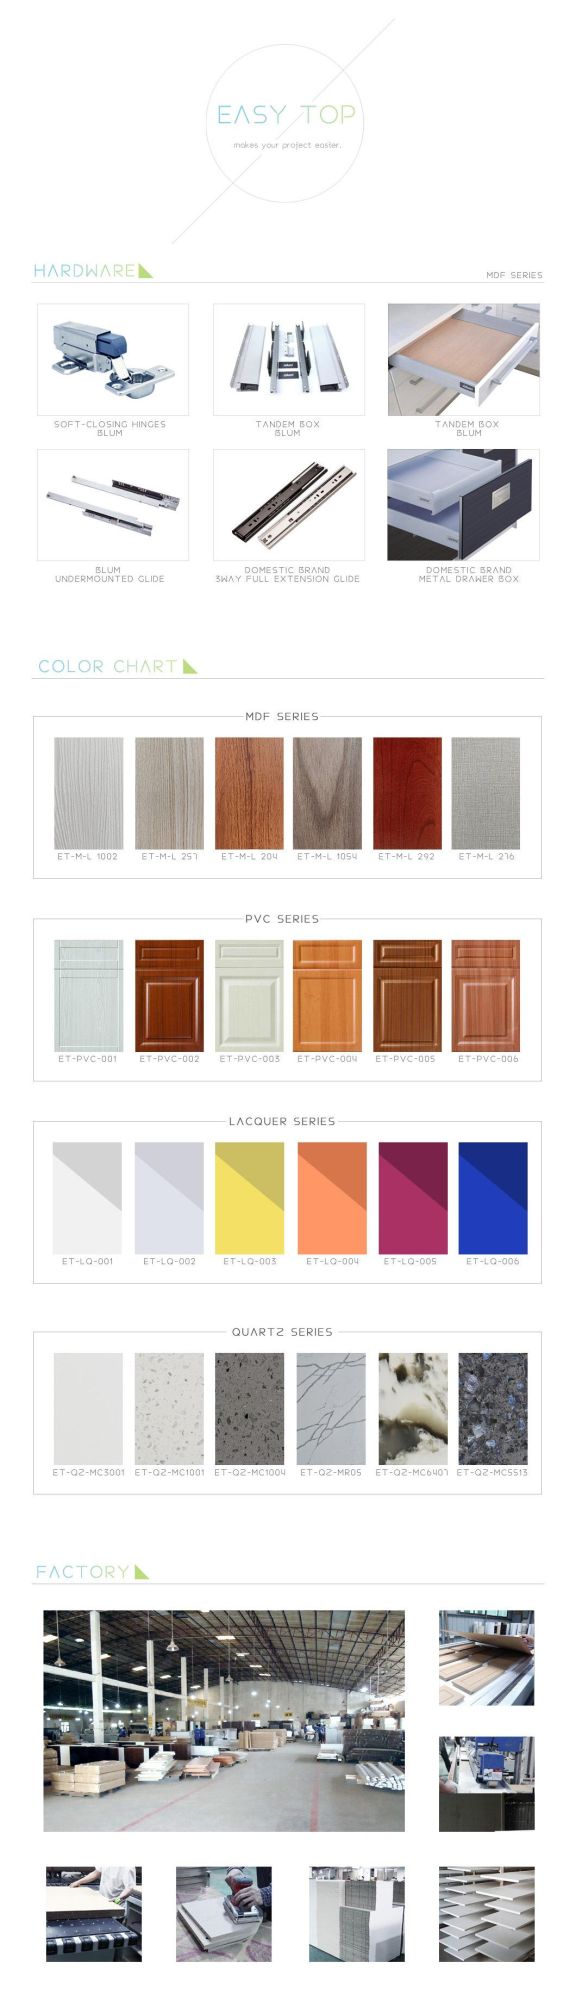 Good Price Display Shelf Solid Wood Recessed Panel Wood Grain Kitchen Cabinets